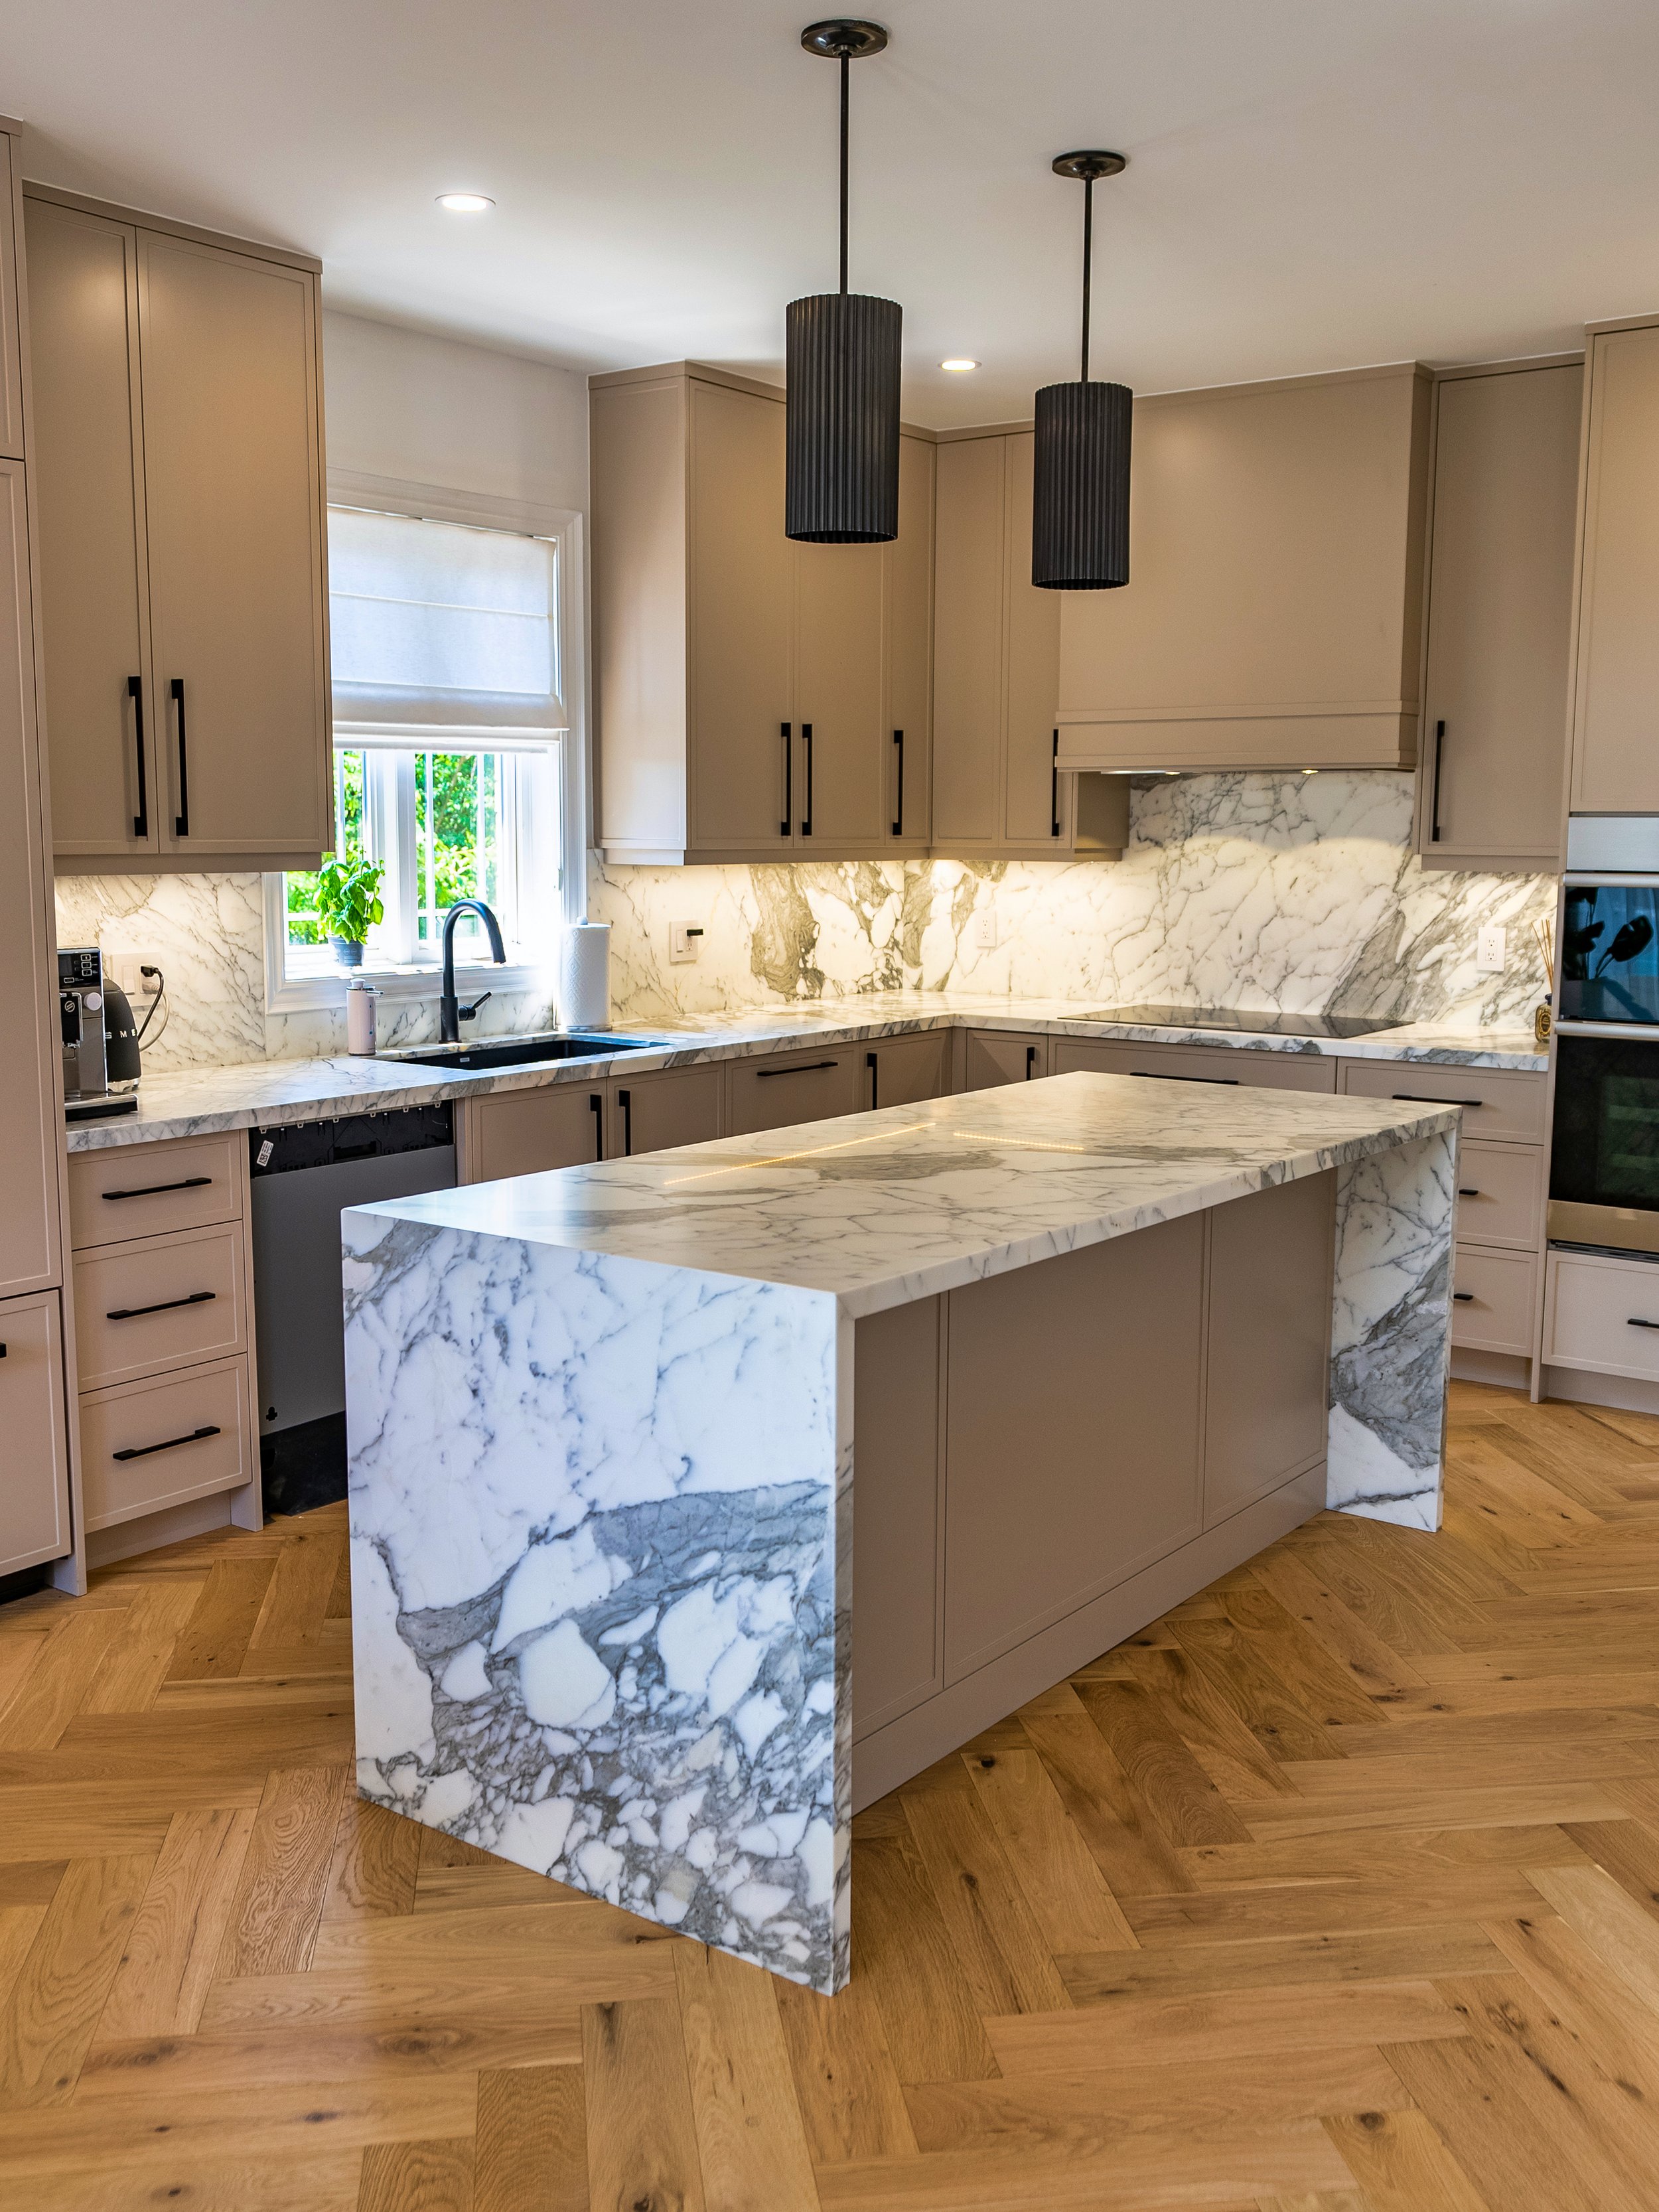  Timeless Calacatta Marble kitchen fully protected with honed PROSHIELD &amp;. Island, waterfalls, range, countertops &amp; side table. 